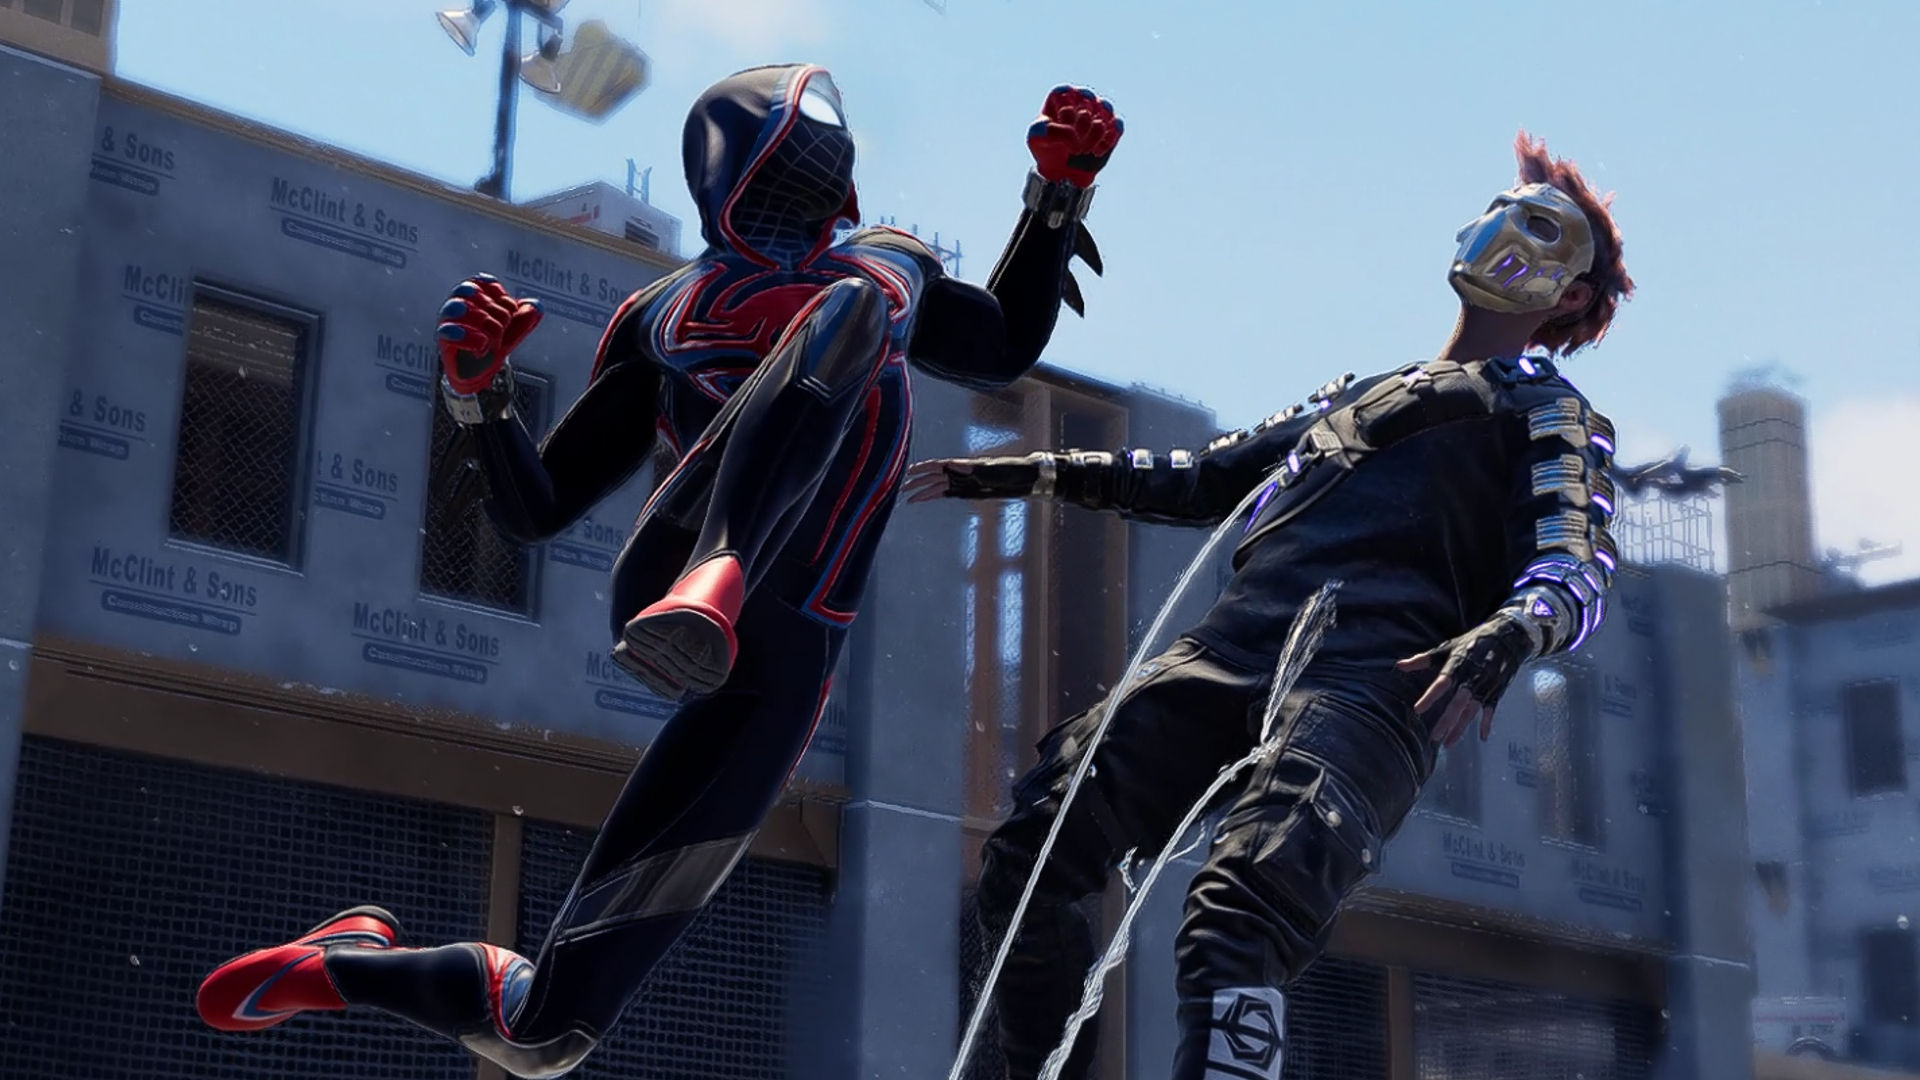 Miles Morales performs a finishing move on an Underground member.